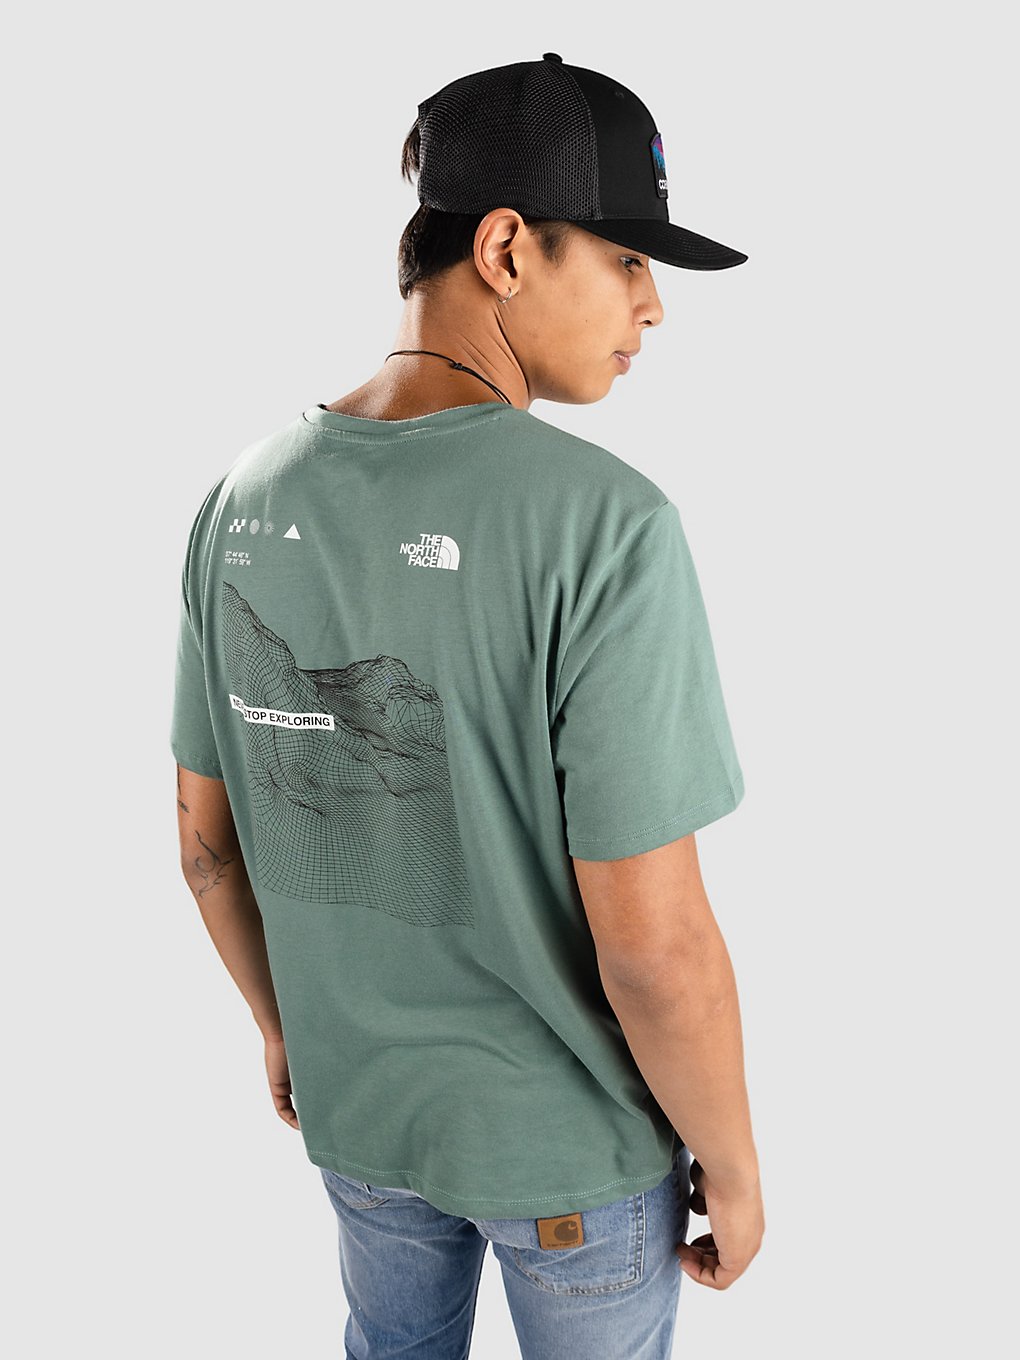 THE NORTH FACE Foundation Graphic T-Shirt groen